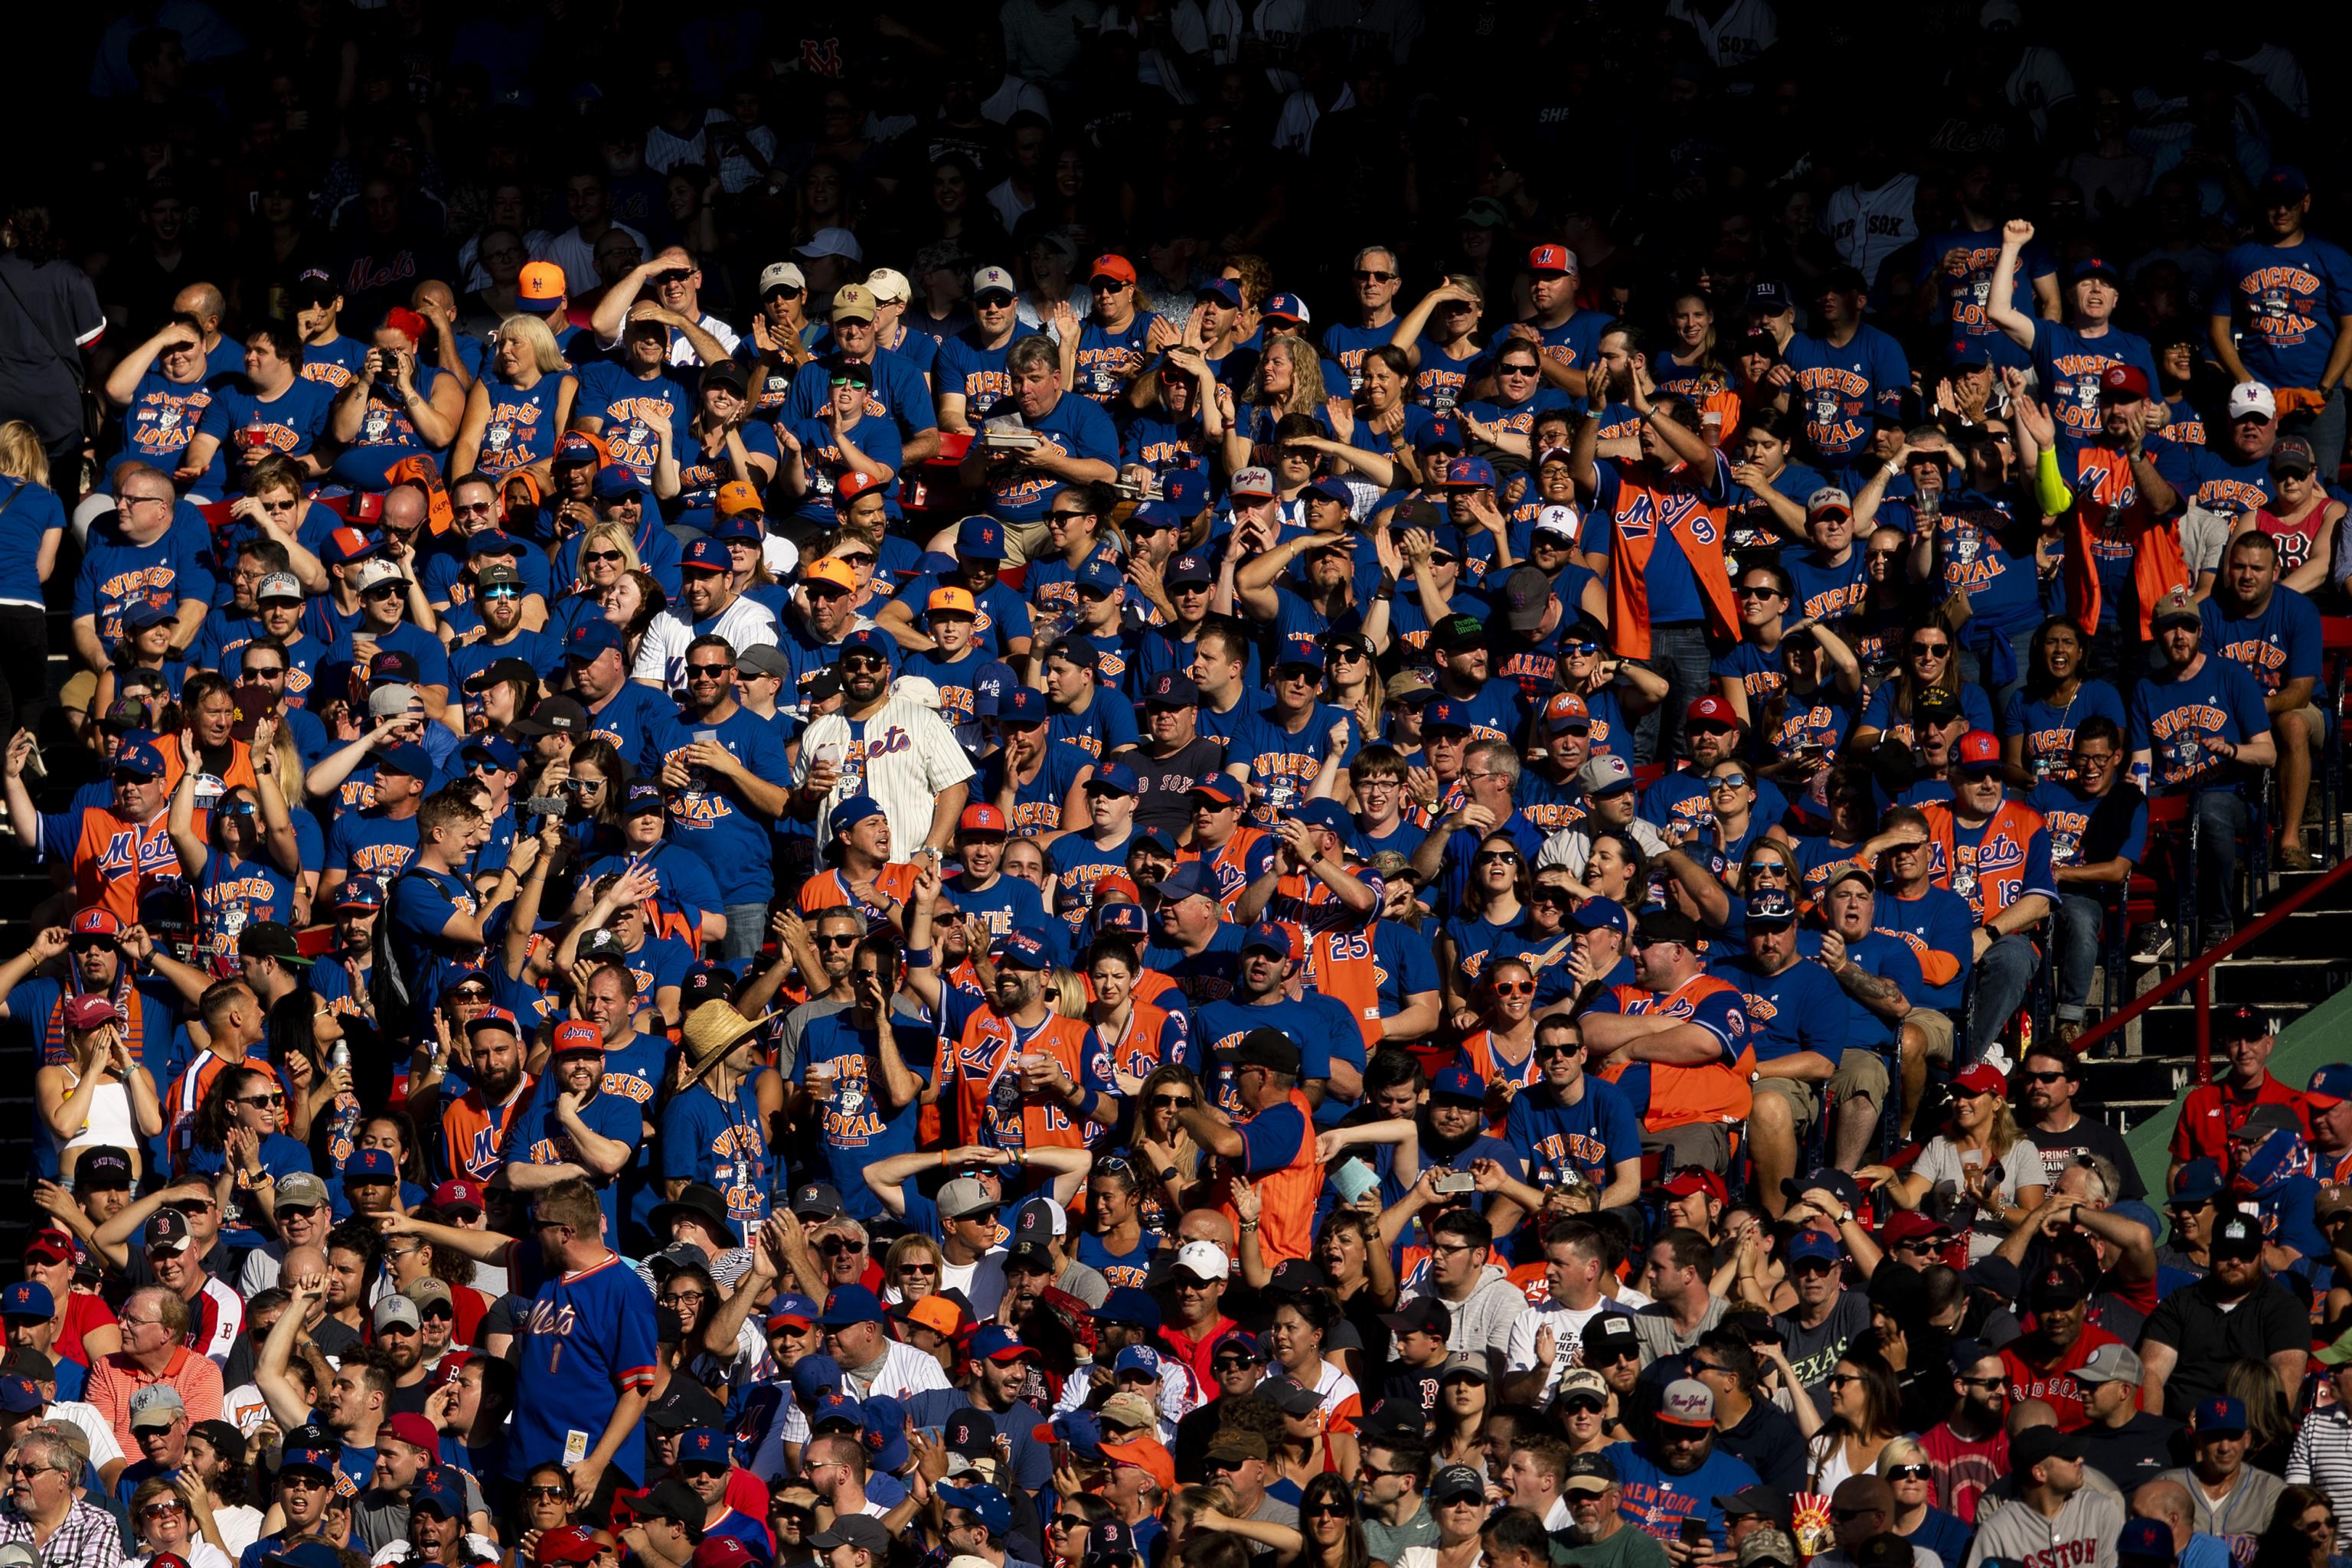 Mets, Red Sox Fans Unite in Rare Moment of Bipartisanship